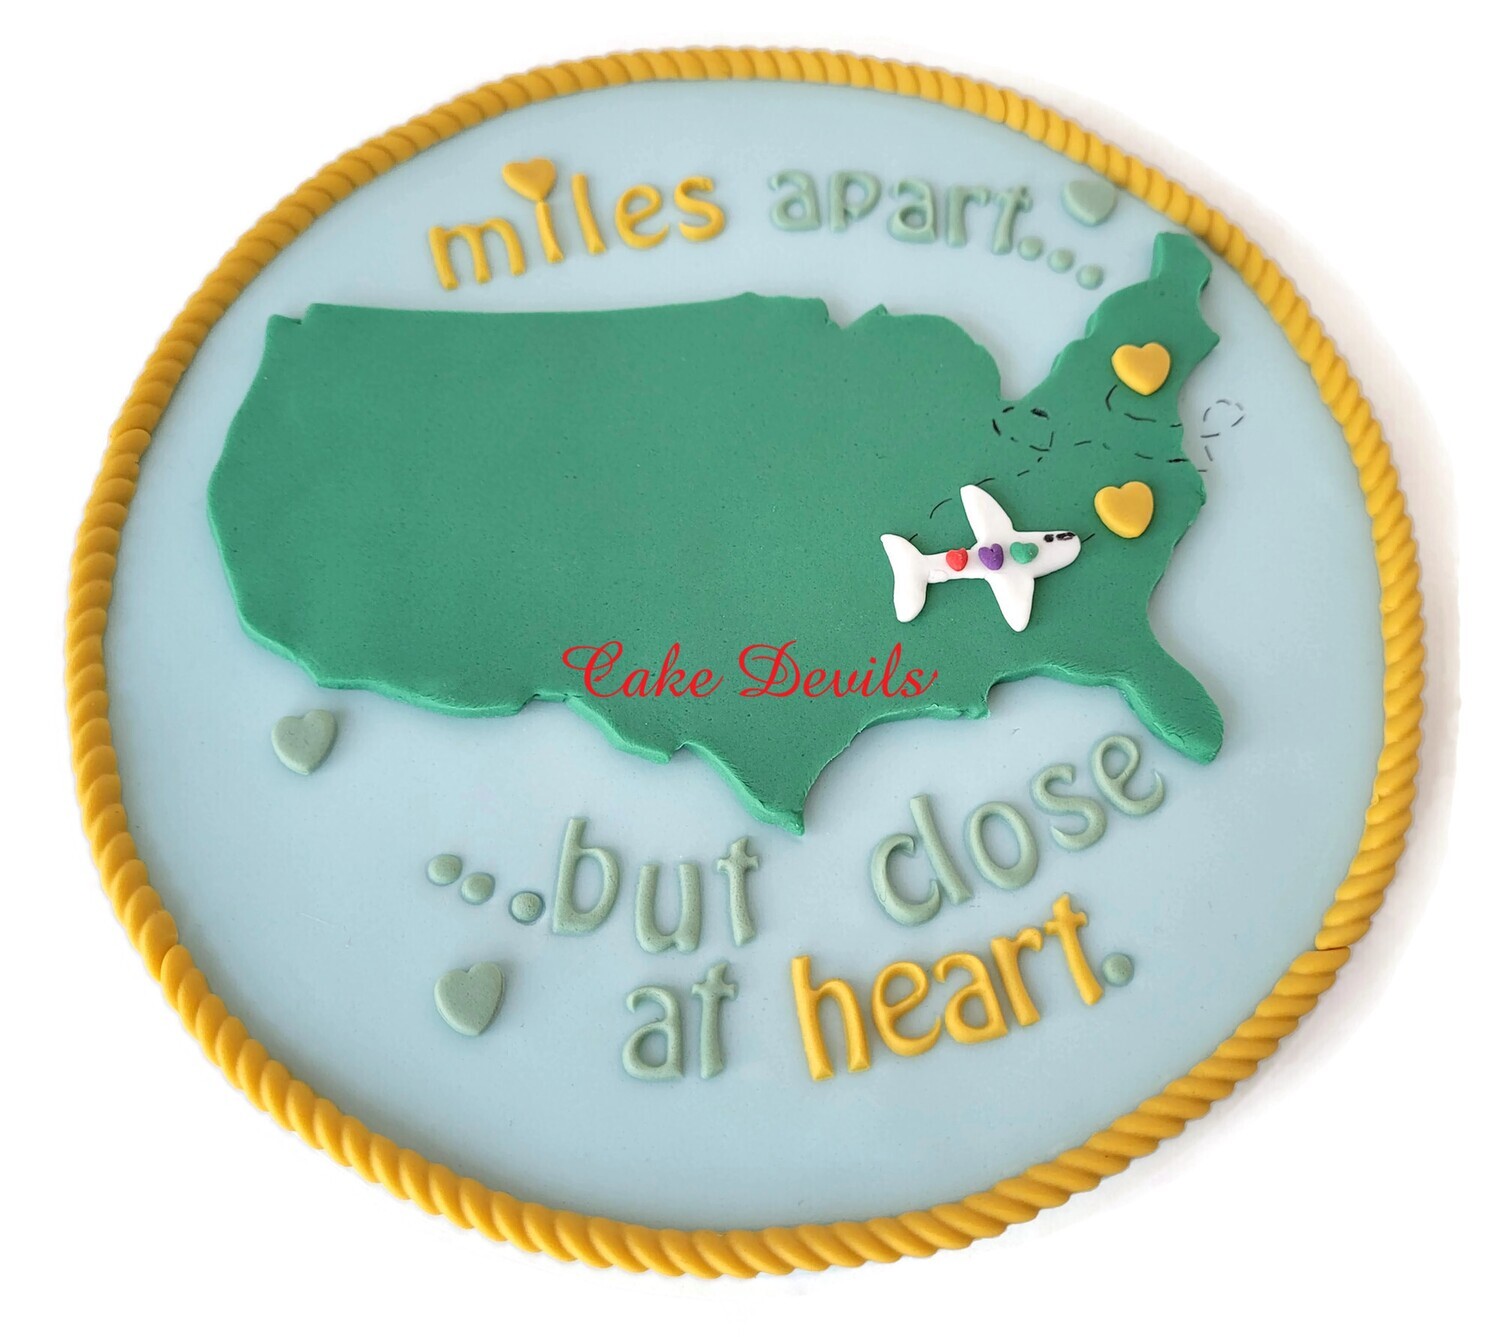 Moving Away Cake, Fondant Map Cake Decorations, Miles Apart but Close at Heart Cake Topper, New Beginnings